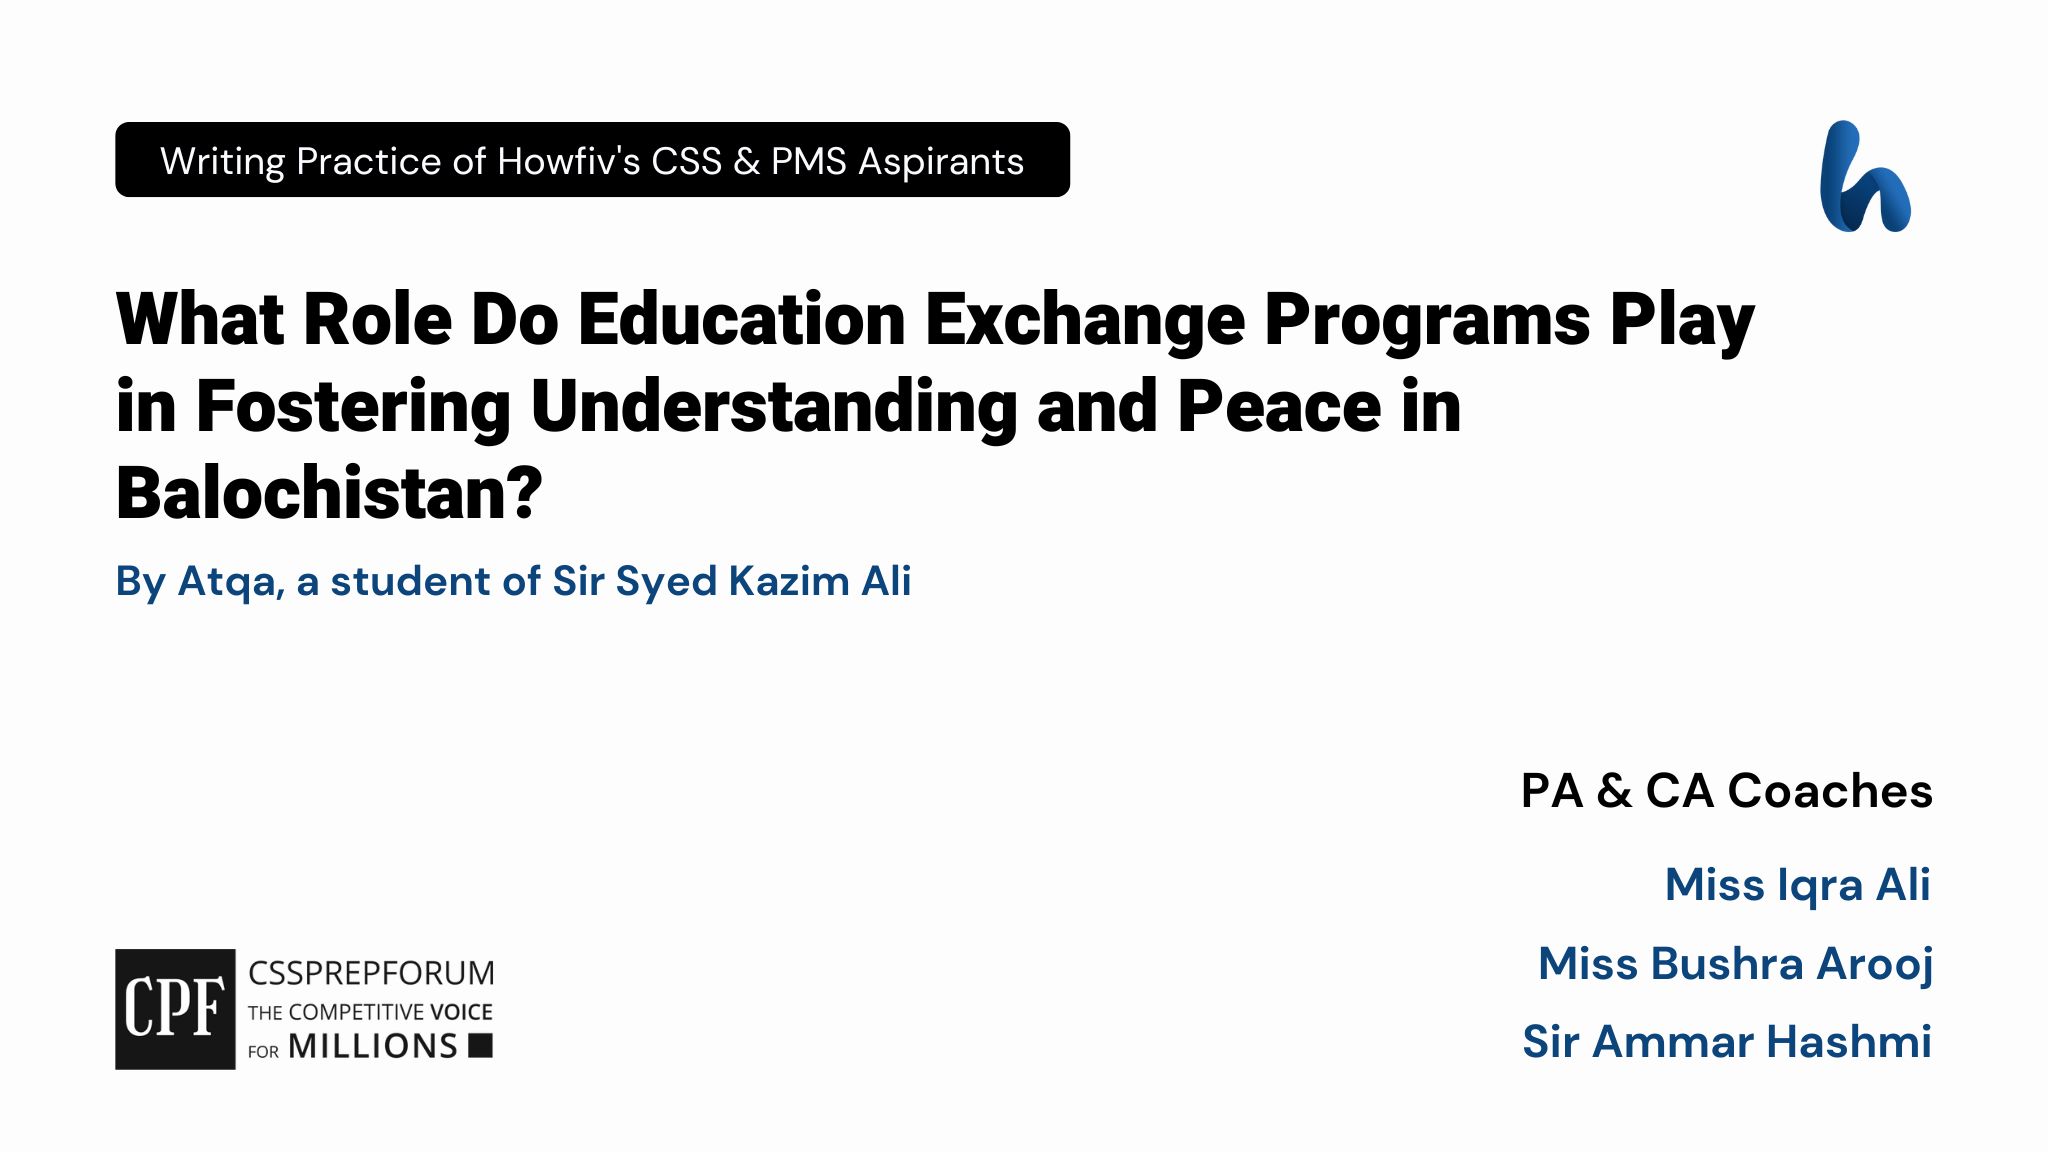 What Role Do Education Exchange Programs Play in Fostering Understanding and Peace in Balochistan?